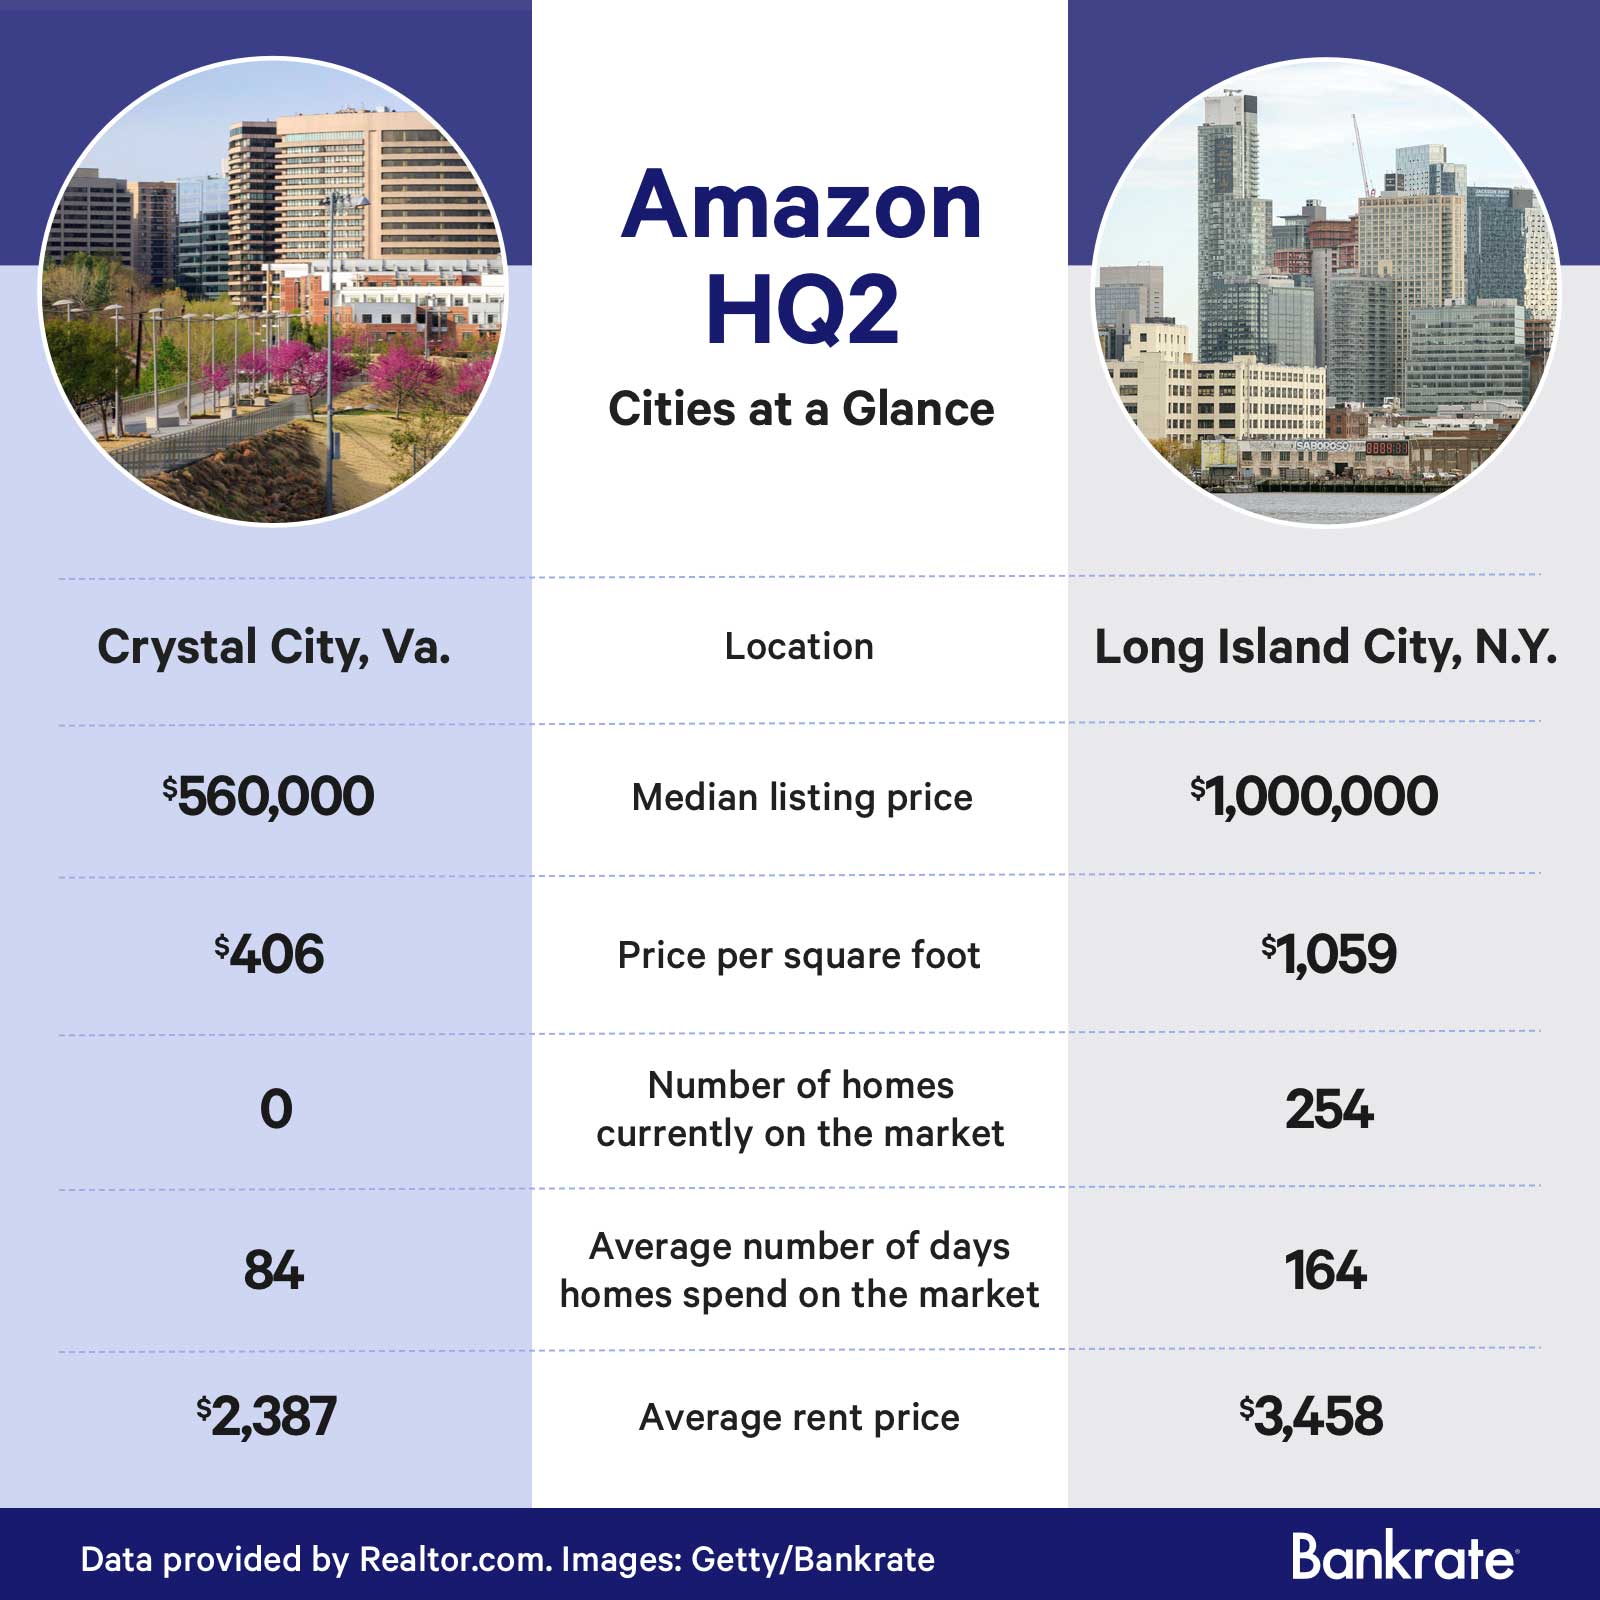 A comparison of Amazon's newest headquarters location: Crystal City, Va. and Long Island City, N.Y.